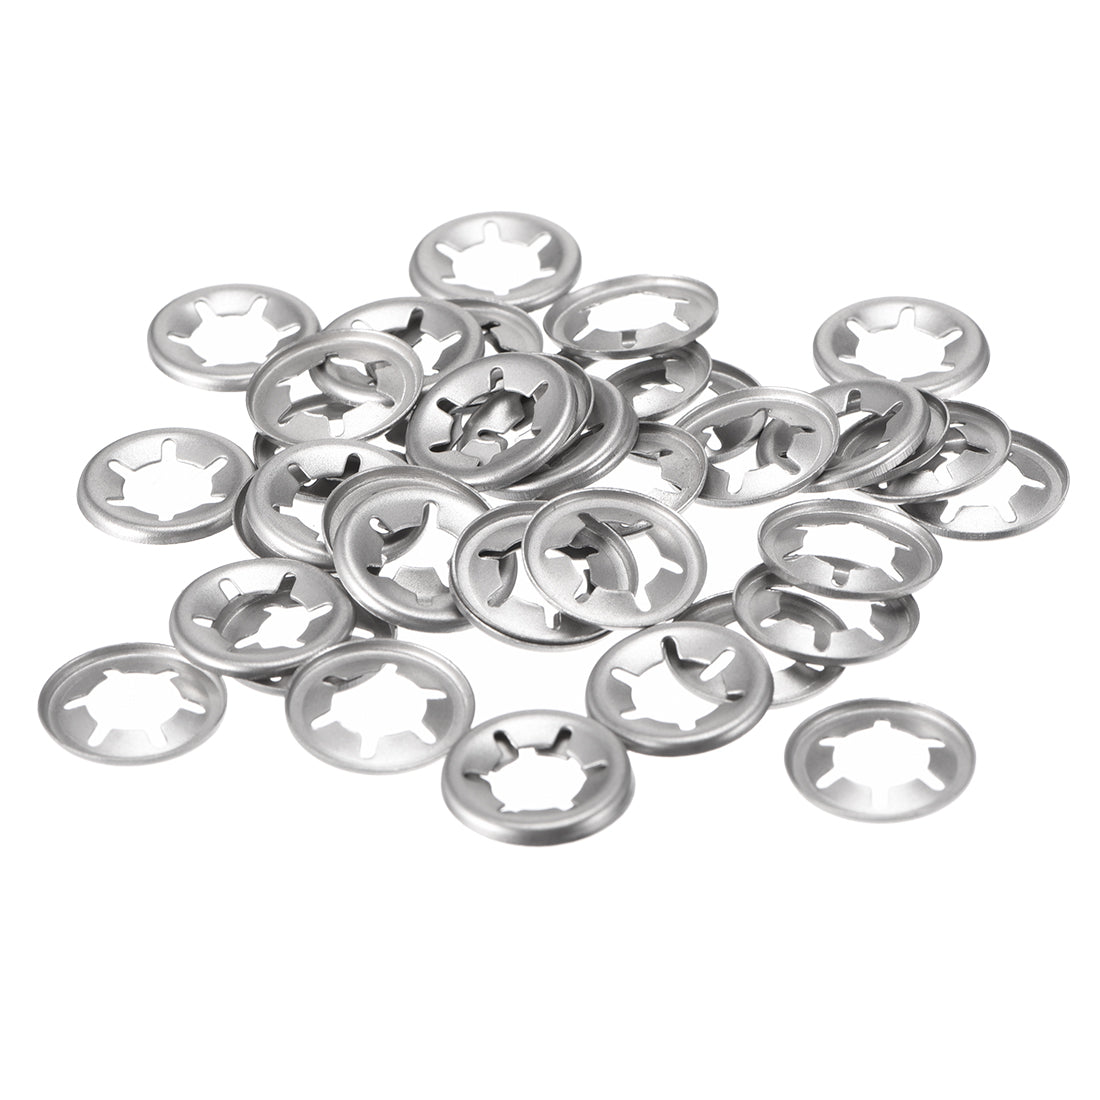 Uxcell Uxcell M12 Internal Tooth Star Locking Washer 11.2mm I.D. 24.5mm O.D. Lock Washers Push On Locking Speed Clip, 304 Stainless Steel 40pcs